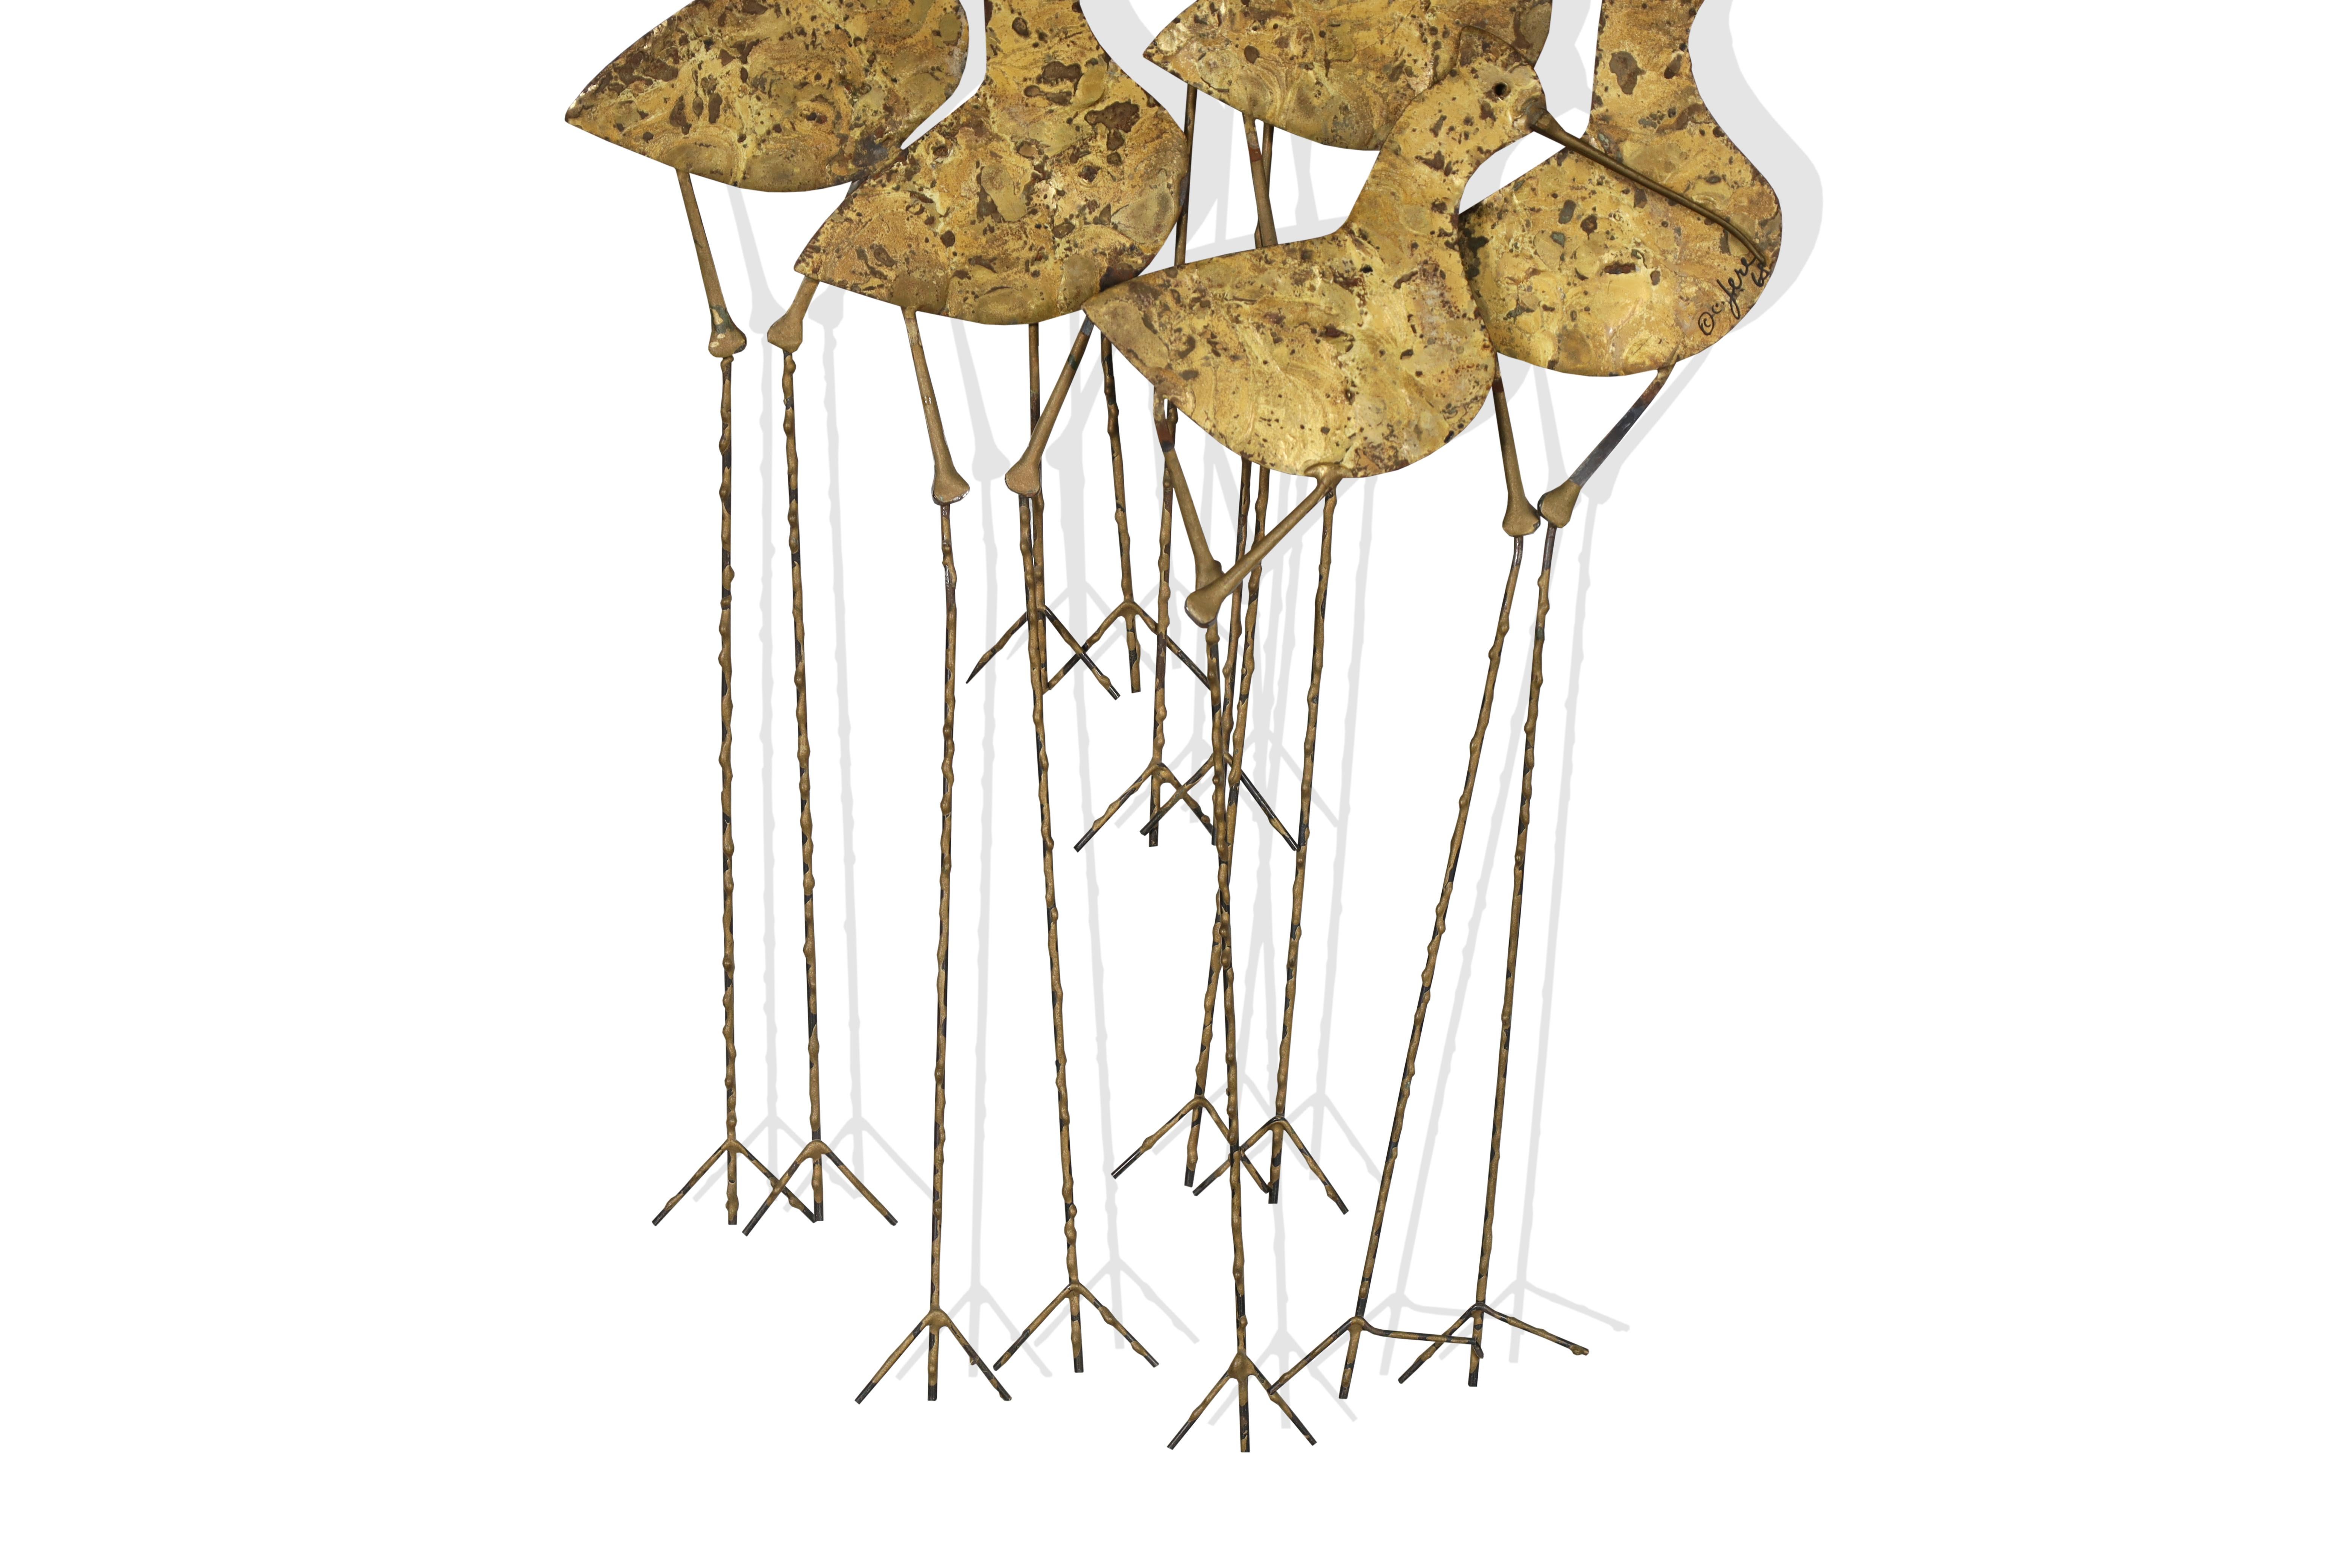 Mid-20th Century Vintage Metal Sandpipers Wall Sculpture by Curtis Jere, Signed For Sale